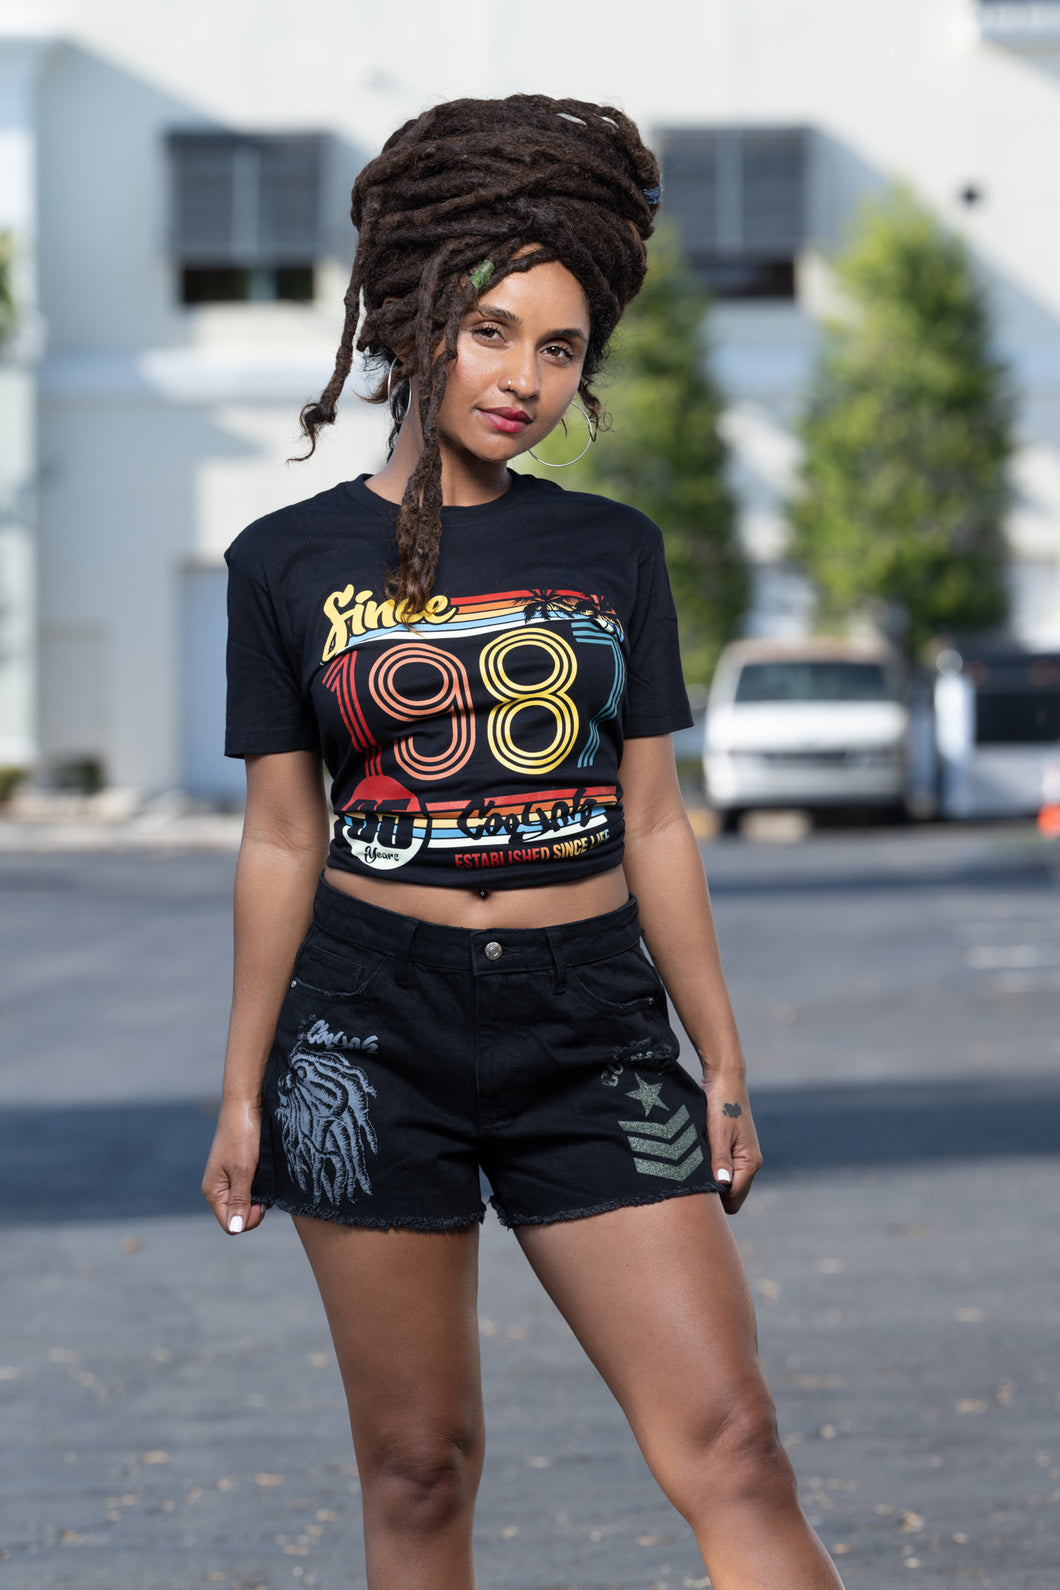 Cooyah Jamaican clothing brand.  Retro style women's black graphic tee with colorful 1987 design on the front.